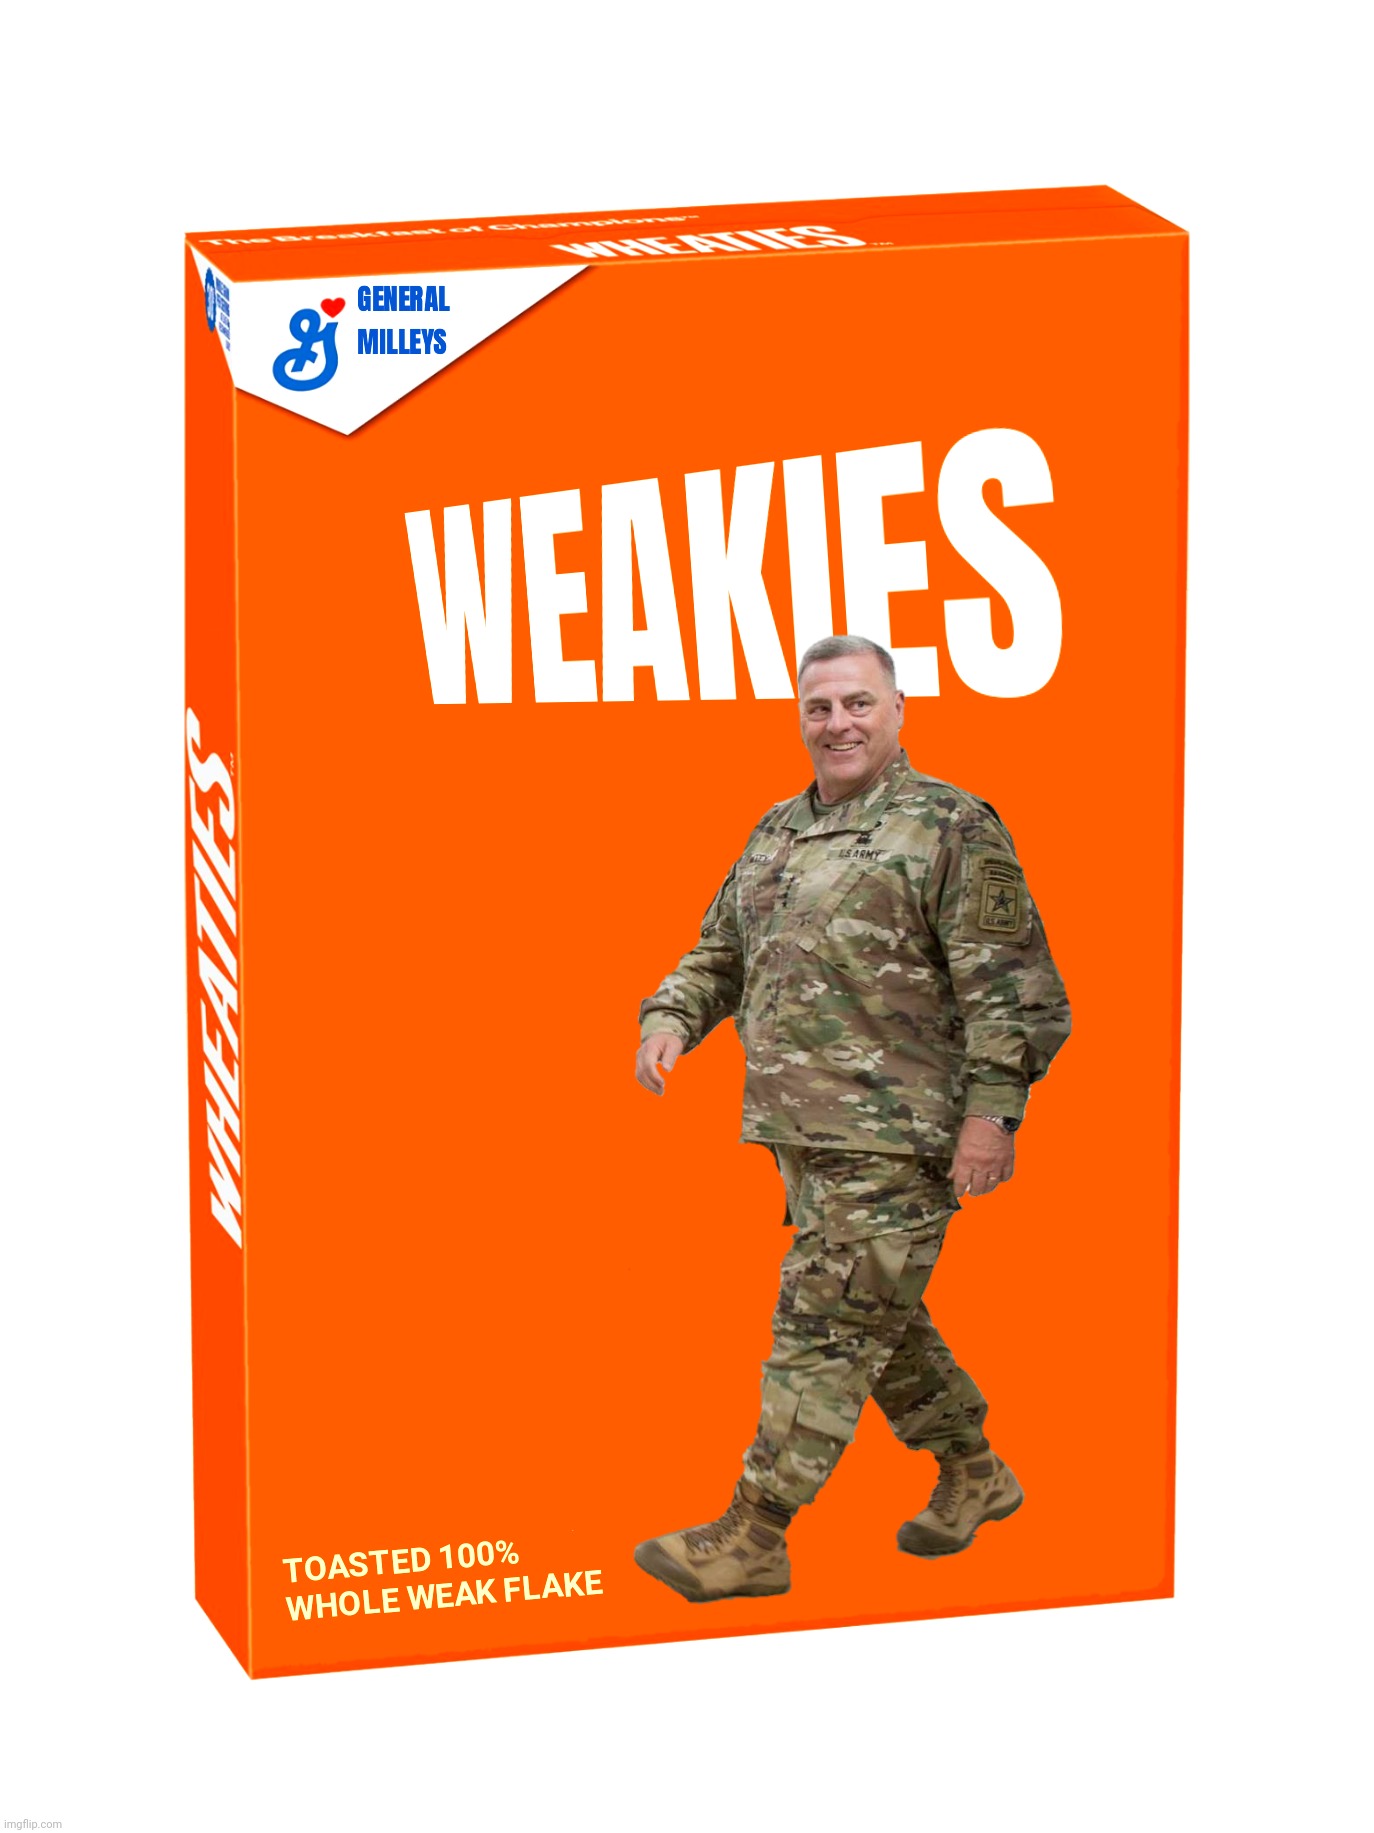 Toasted 100% whole weak flake.  Concept by Cryptic_Truth, bad photoshop by btbeeston | image tagged in bad photoshop,mark milley,wheaties,general milleys | made w/ Imgflip meme maker